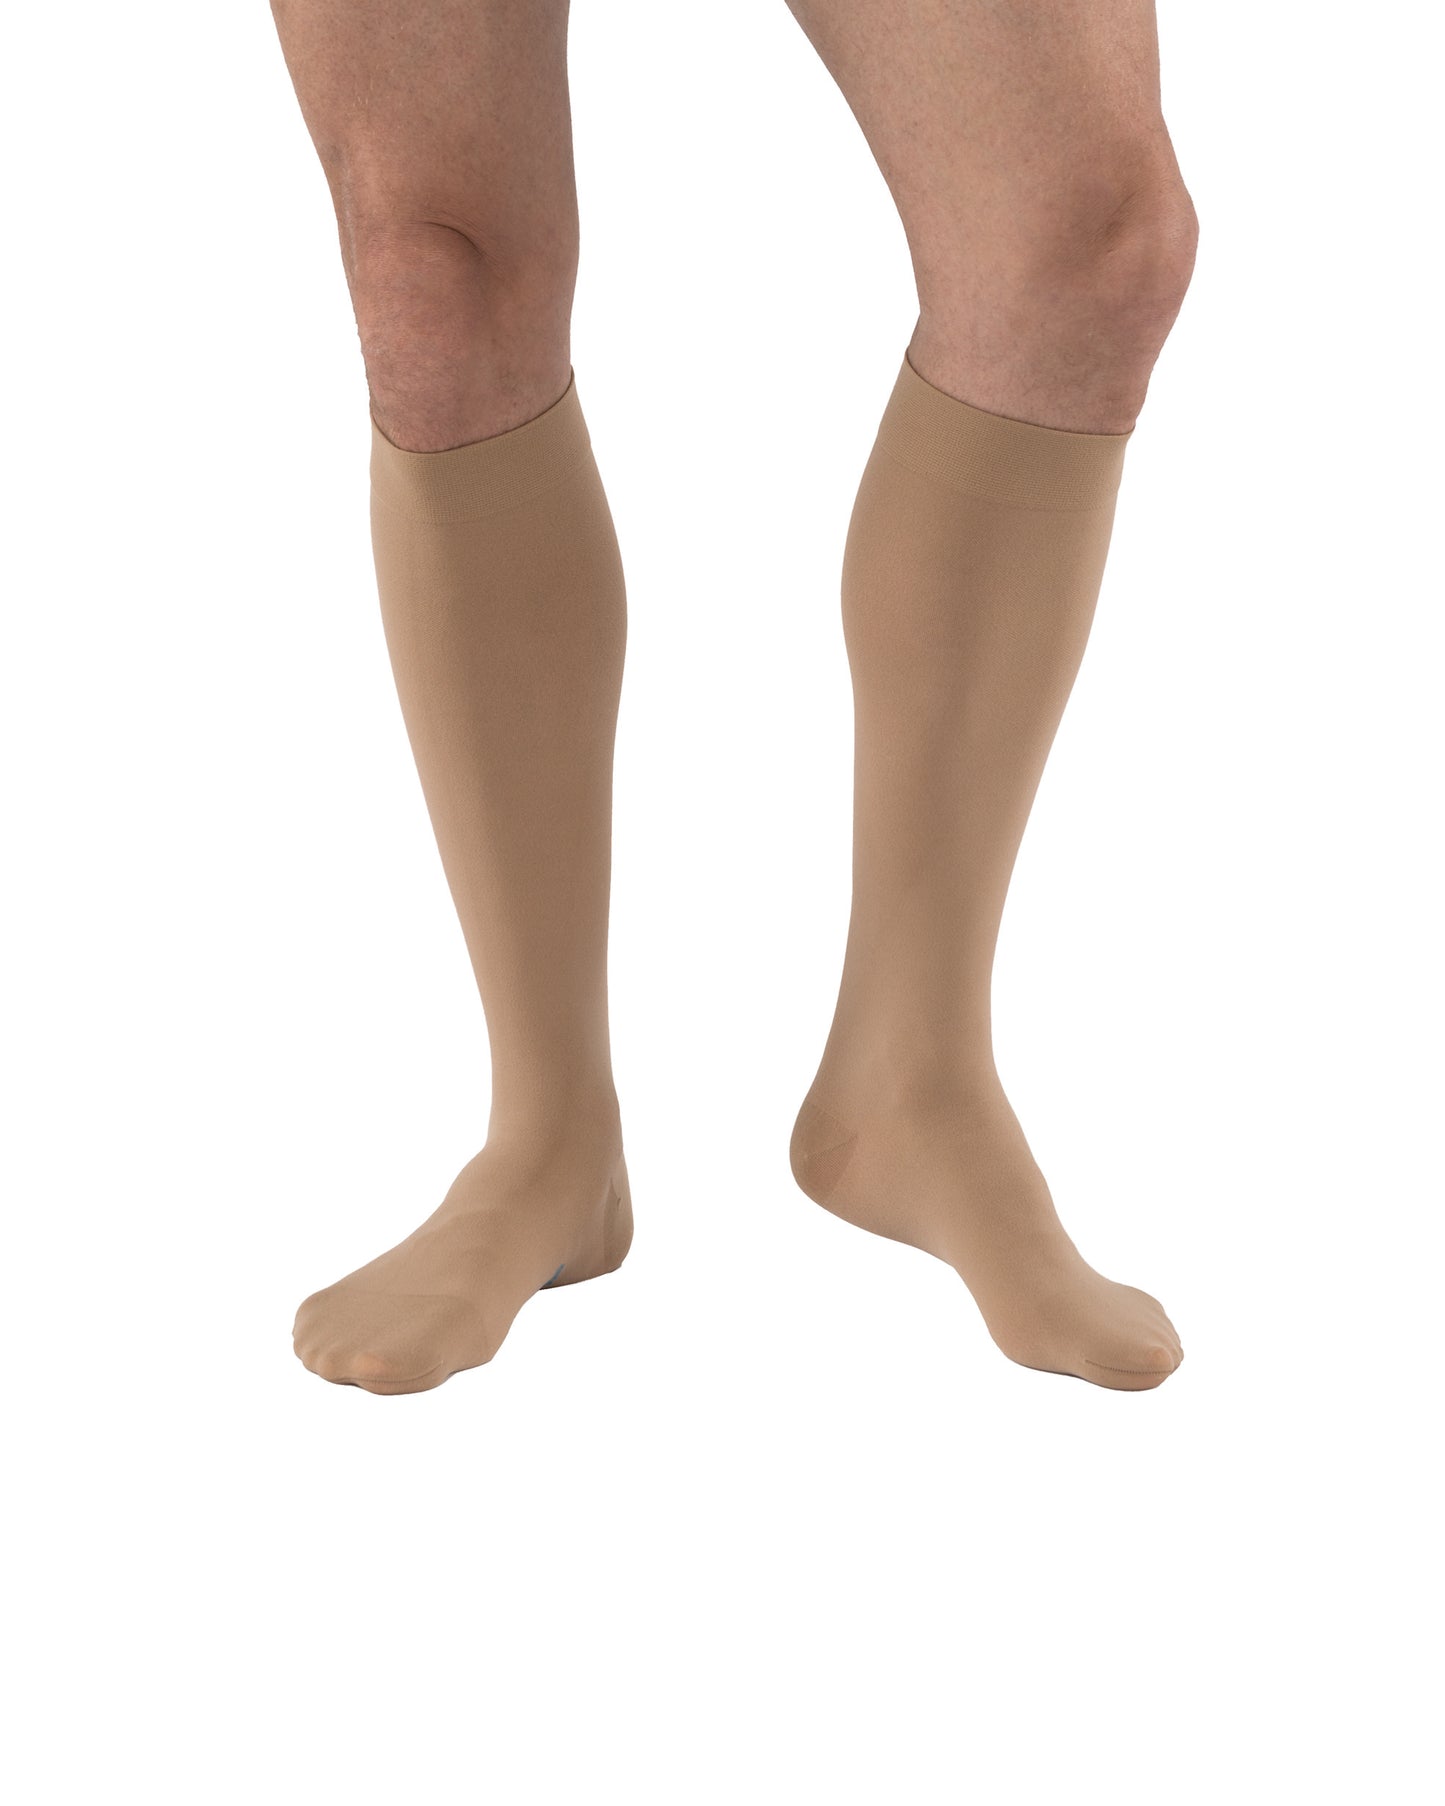 JOBST Relief Compression Stockings 15-20 mmHg Knee High Closed Toe